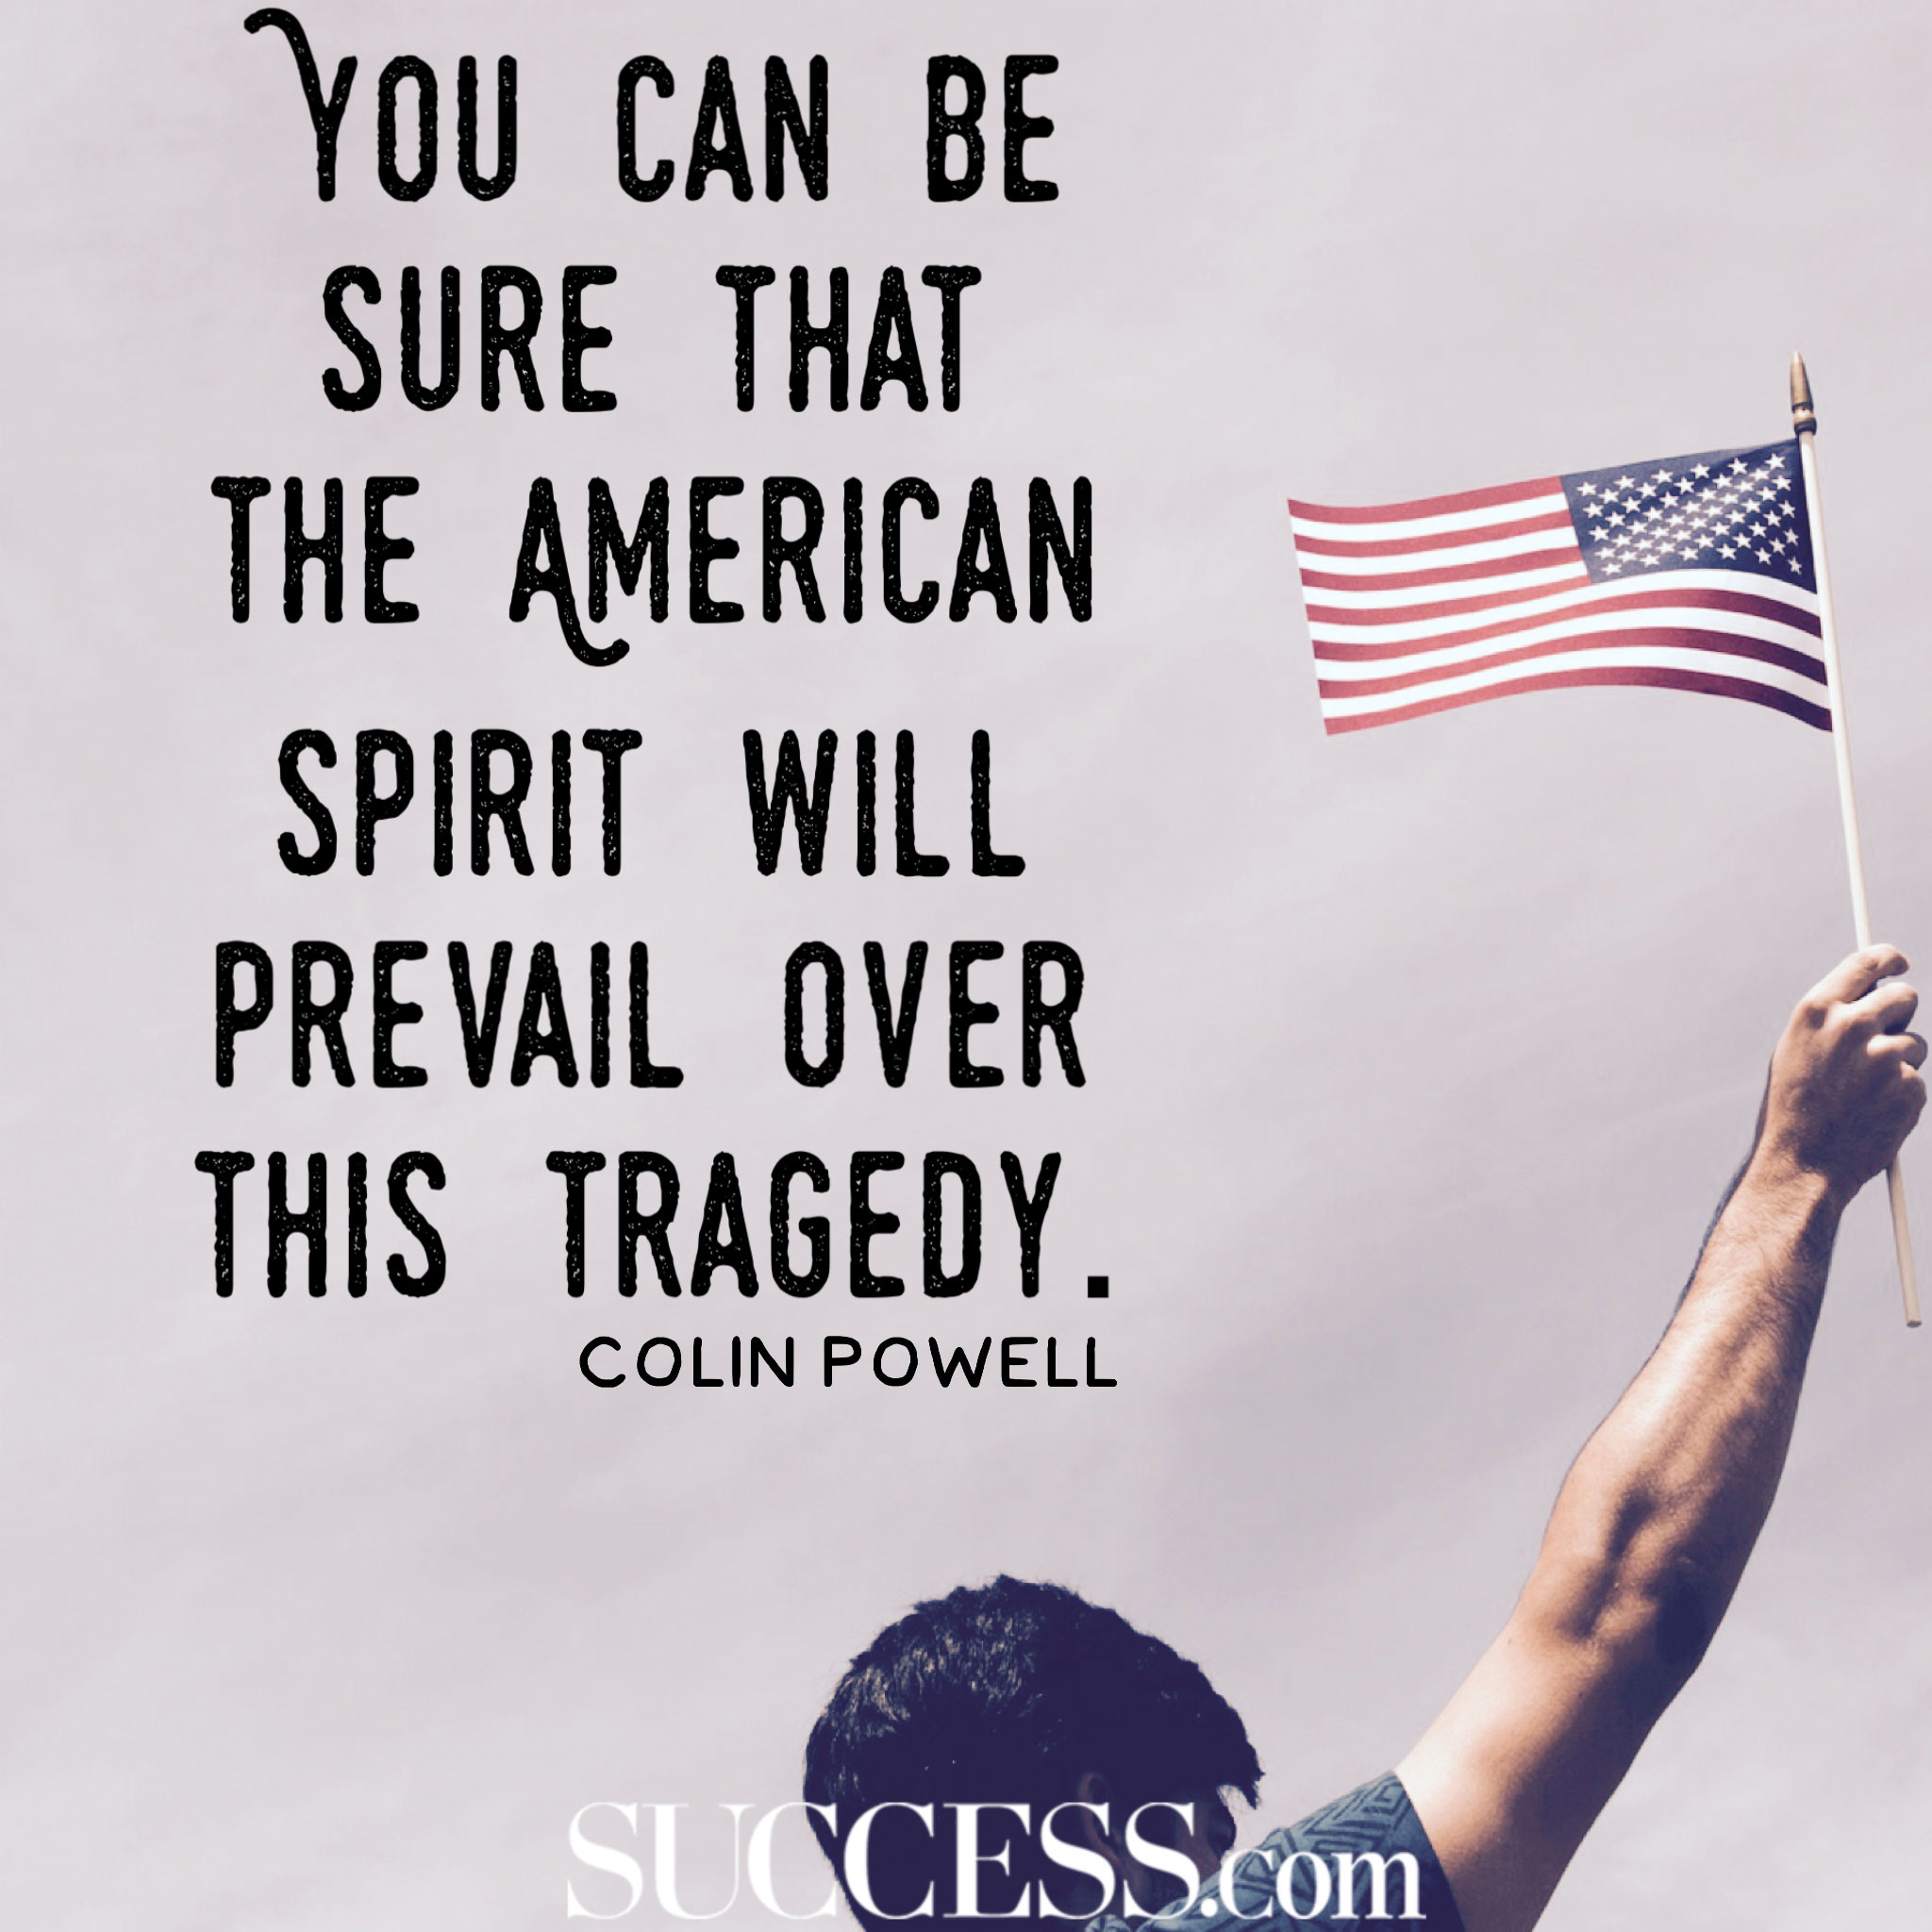 13 Thoughtful Quotes to Remember 9/11 | SUCCESS